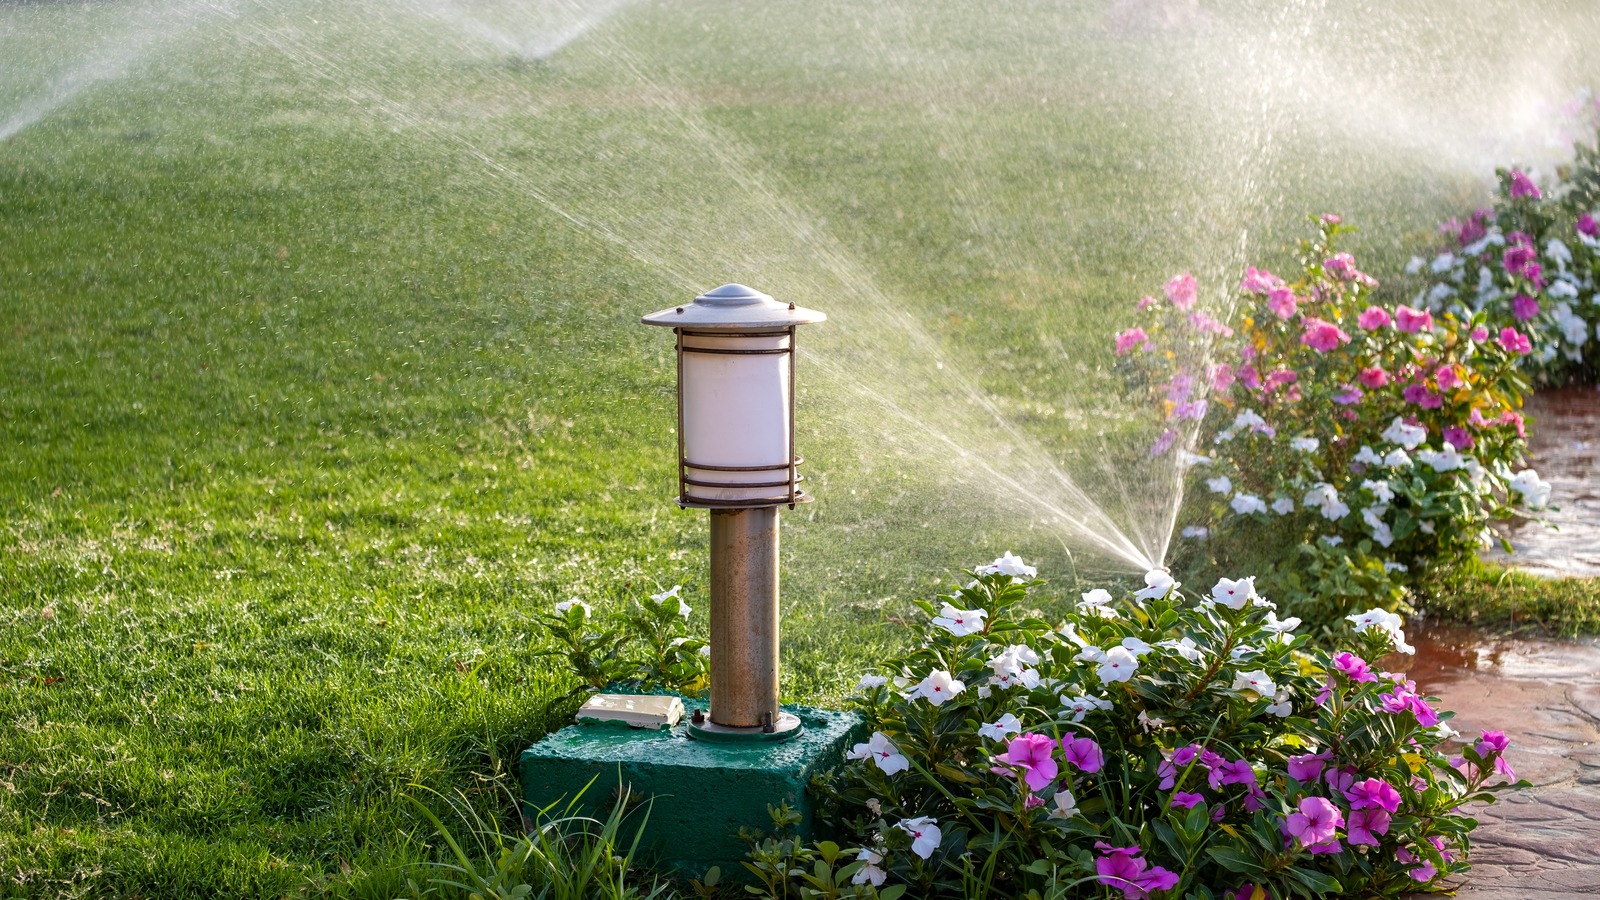 What Should You Expect To Spend On A Lawn Sprinkler System?